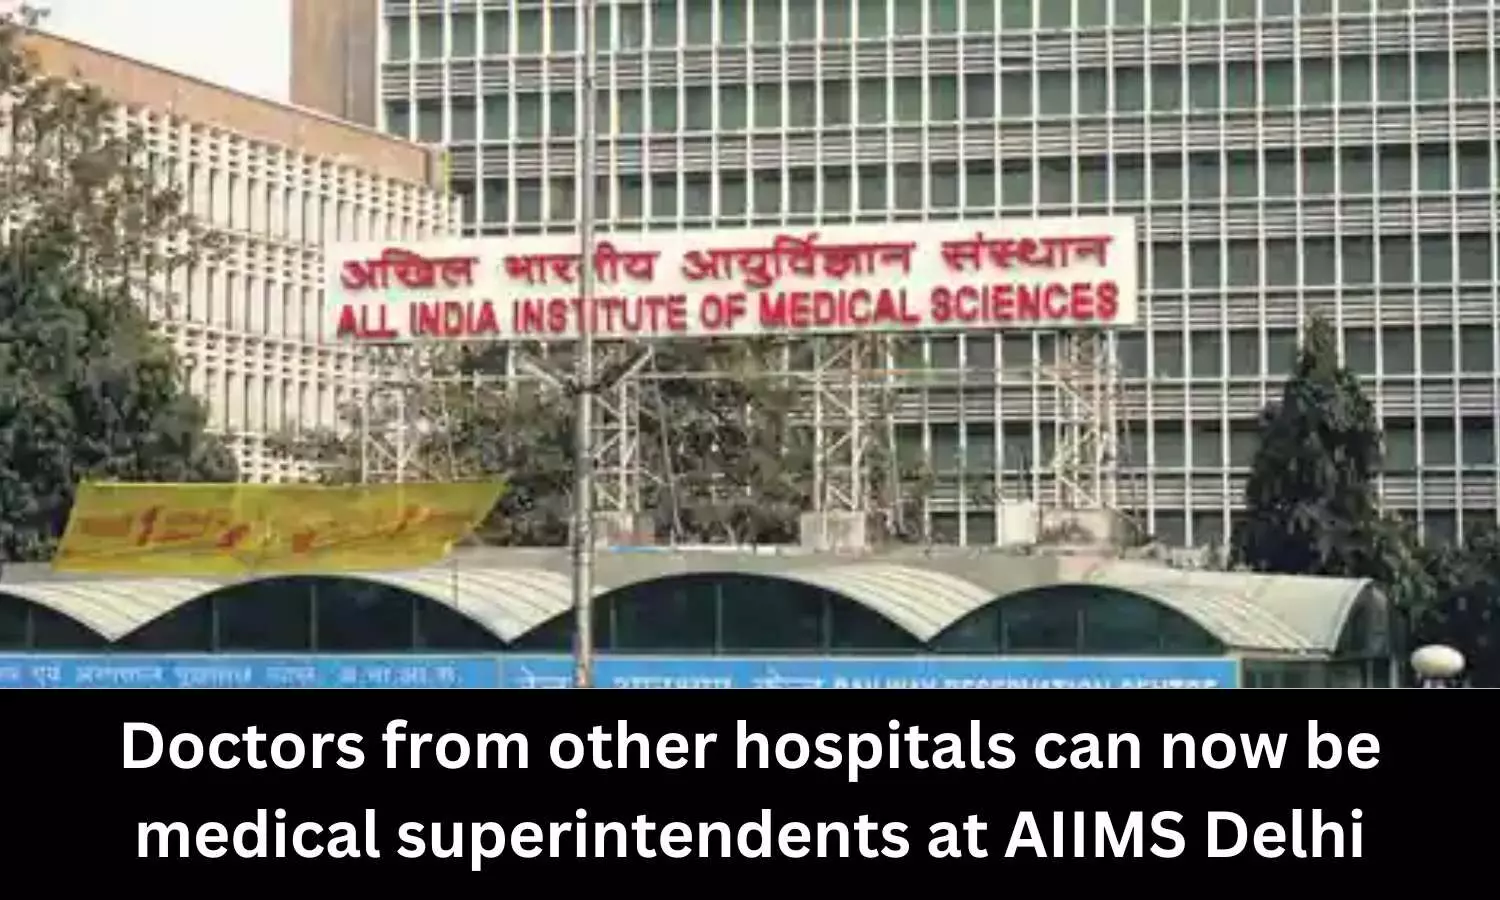 Doctors from other hospitals can now be medical superintendents at AIIMS Delhi